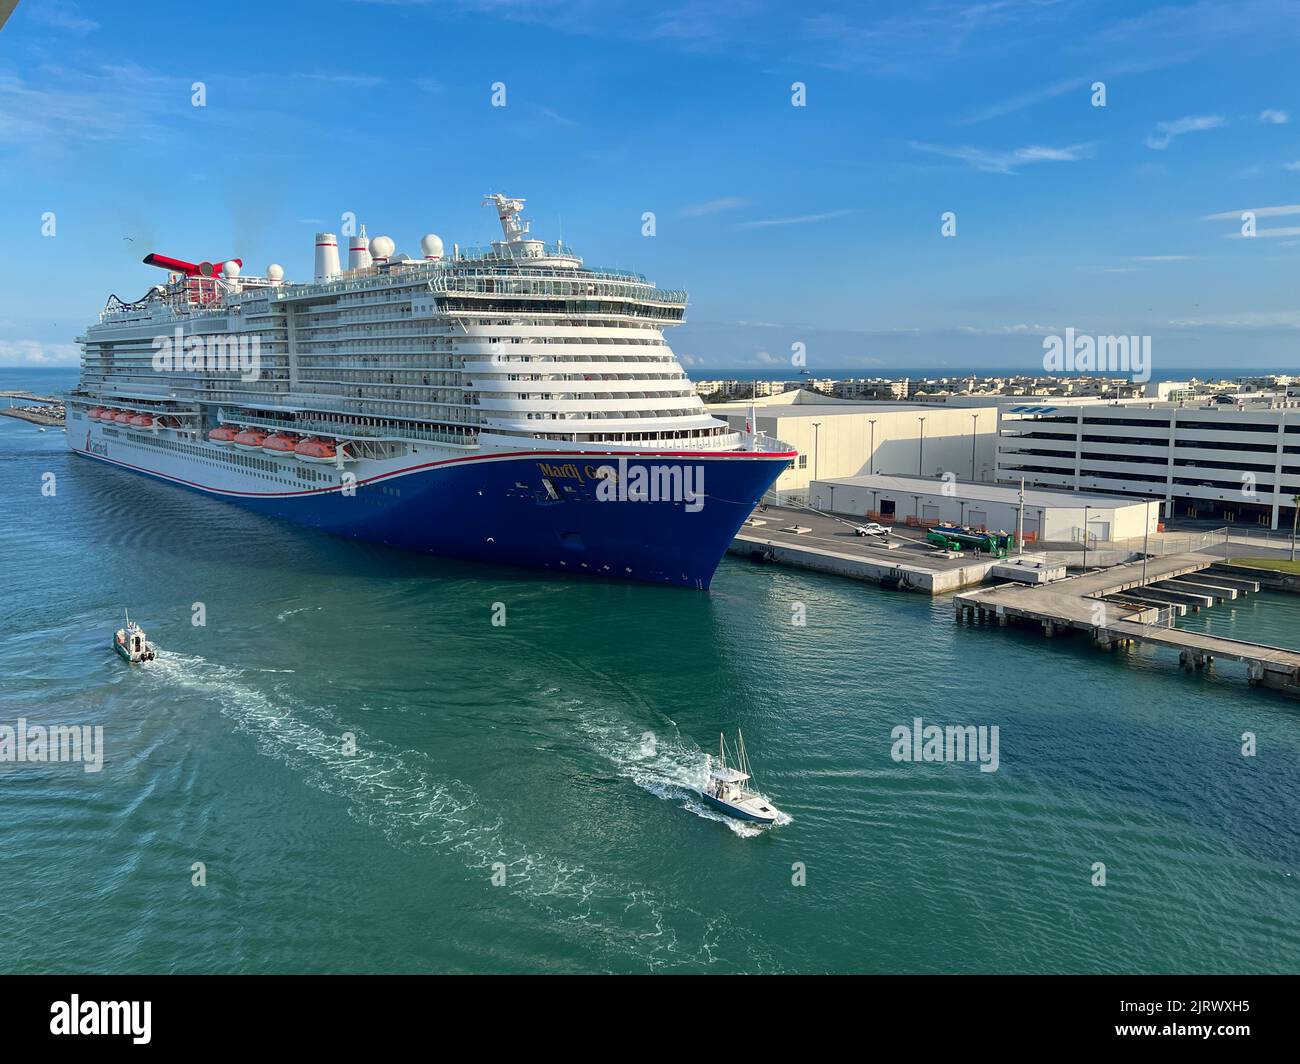 Orlando, FL USA - February 12, 2022: An aerial view of the Carnival Mardi Gras cruise ship at Port Canaveral in Florida. Stock Photo